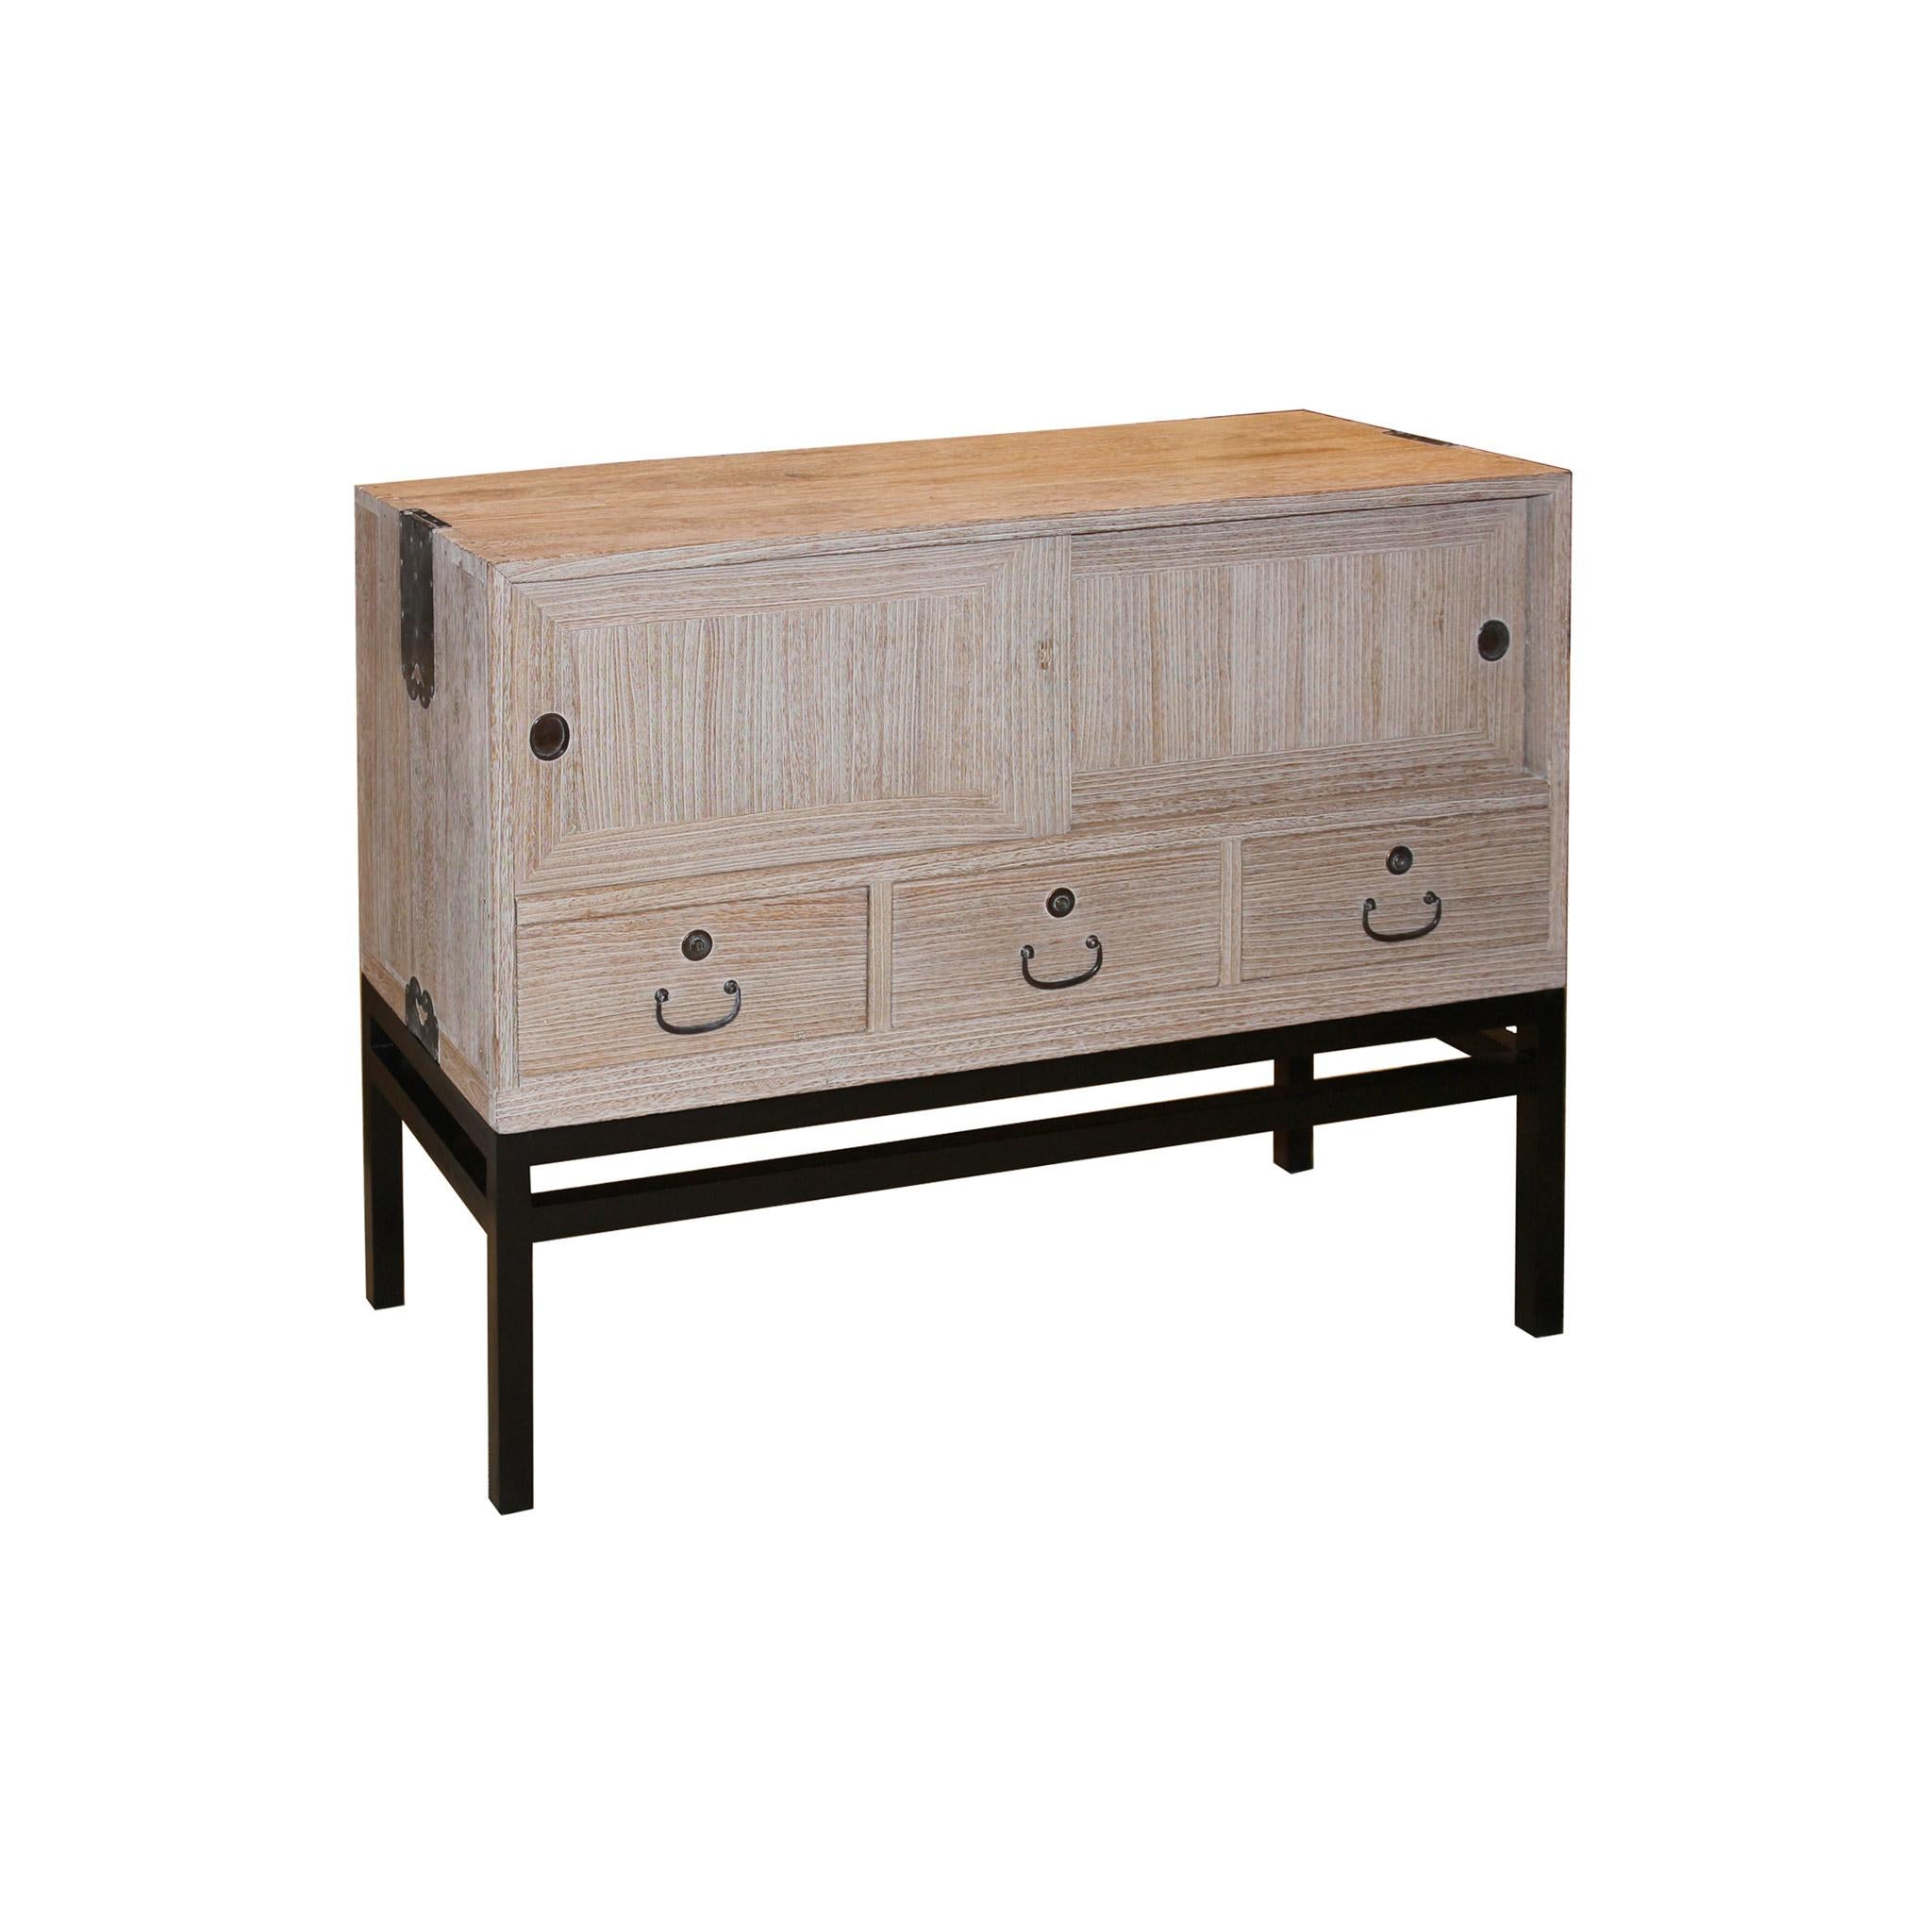 1920s Japanese tansu has been transformed by white wax for a contemporary look for a modern home. Original the top portion of a 3 section clothing chest with original copper hardware. Now on a custom made black lacquer wood stand. Use as a bedside